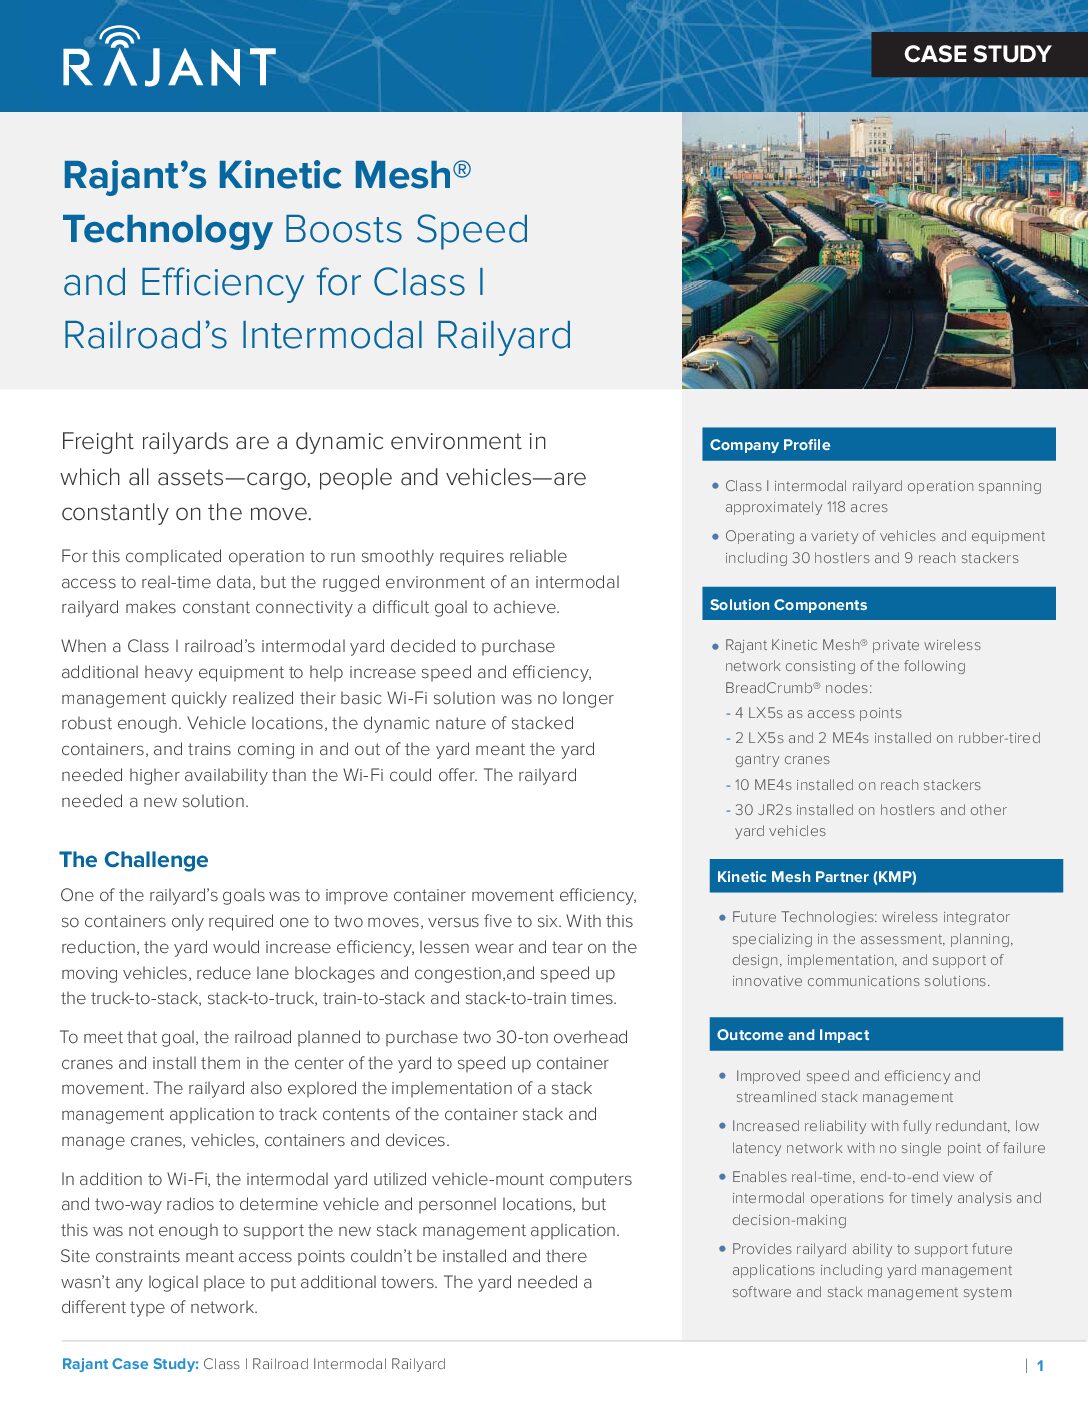 Rajant Technology Boosts Speed and Efficiency for Intermodal Railyards